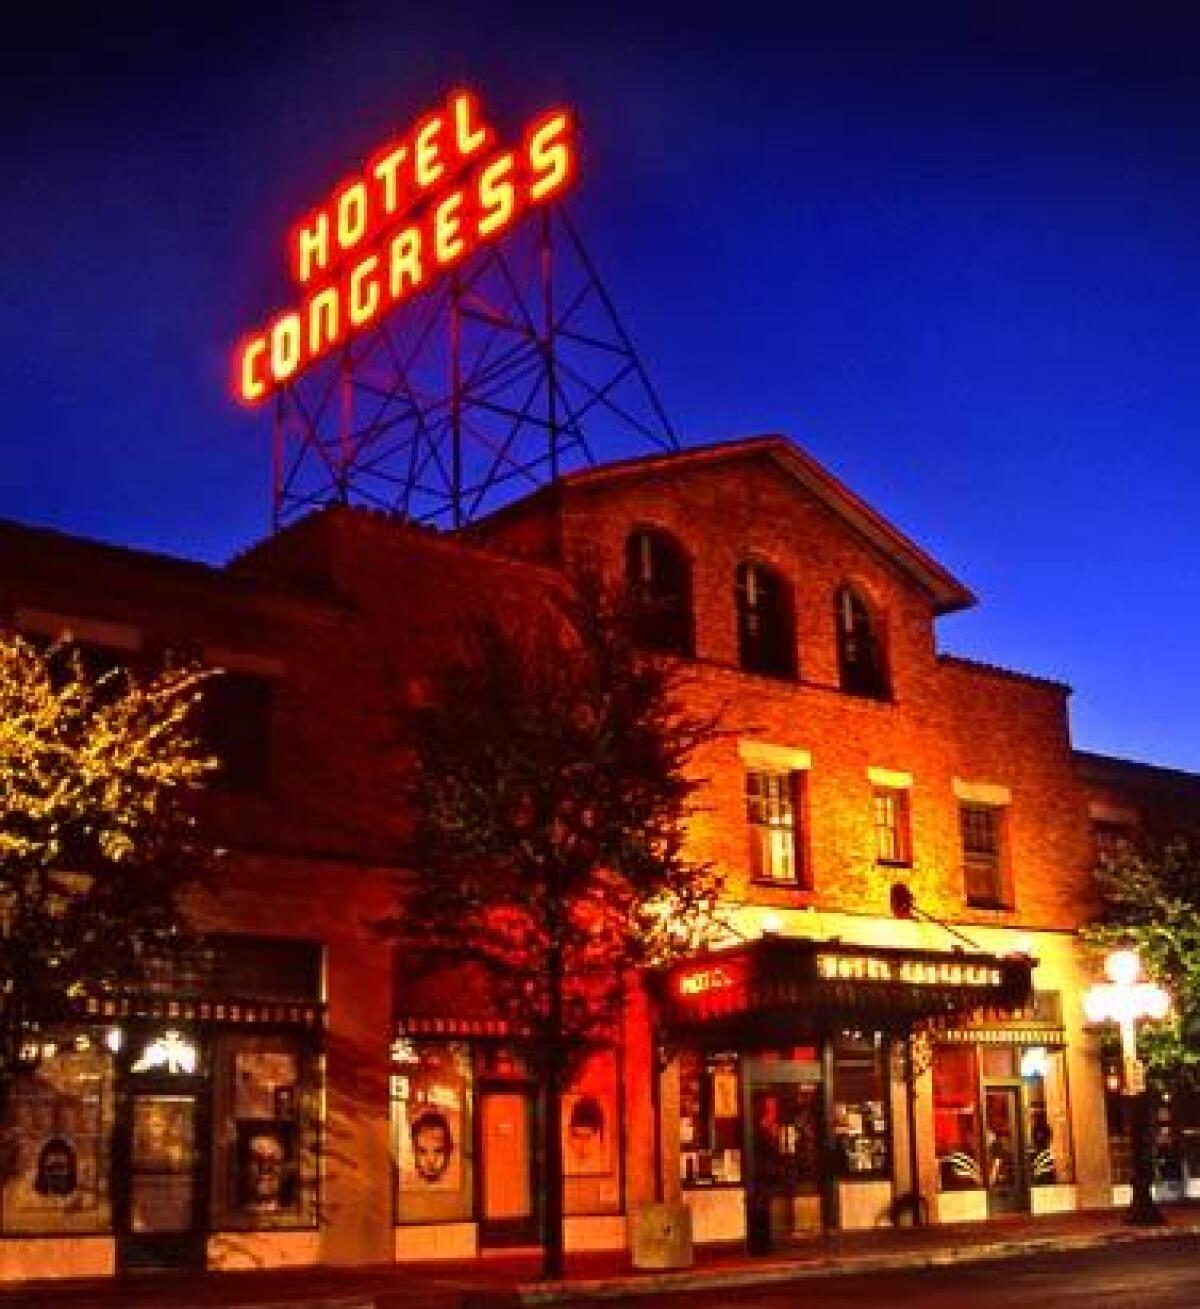 The Hotel Congress in Tucson is home to the Club Congress, one of the top rock music venues in the country. With more than 300 live shows annually and two or three acts on each bill, about 1,000 bands perform on the Club Congress stage each year.